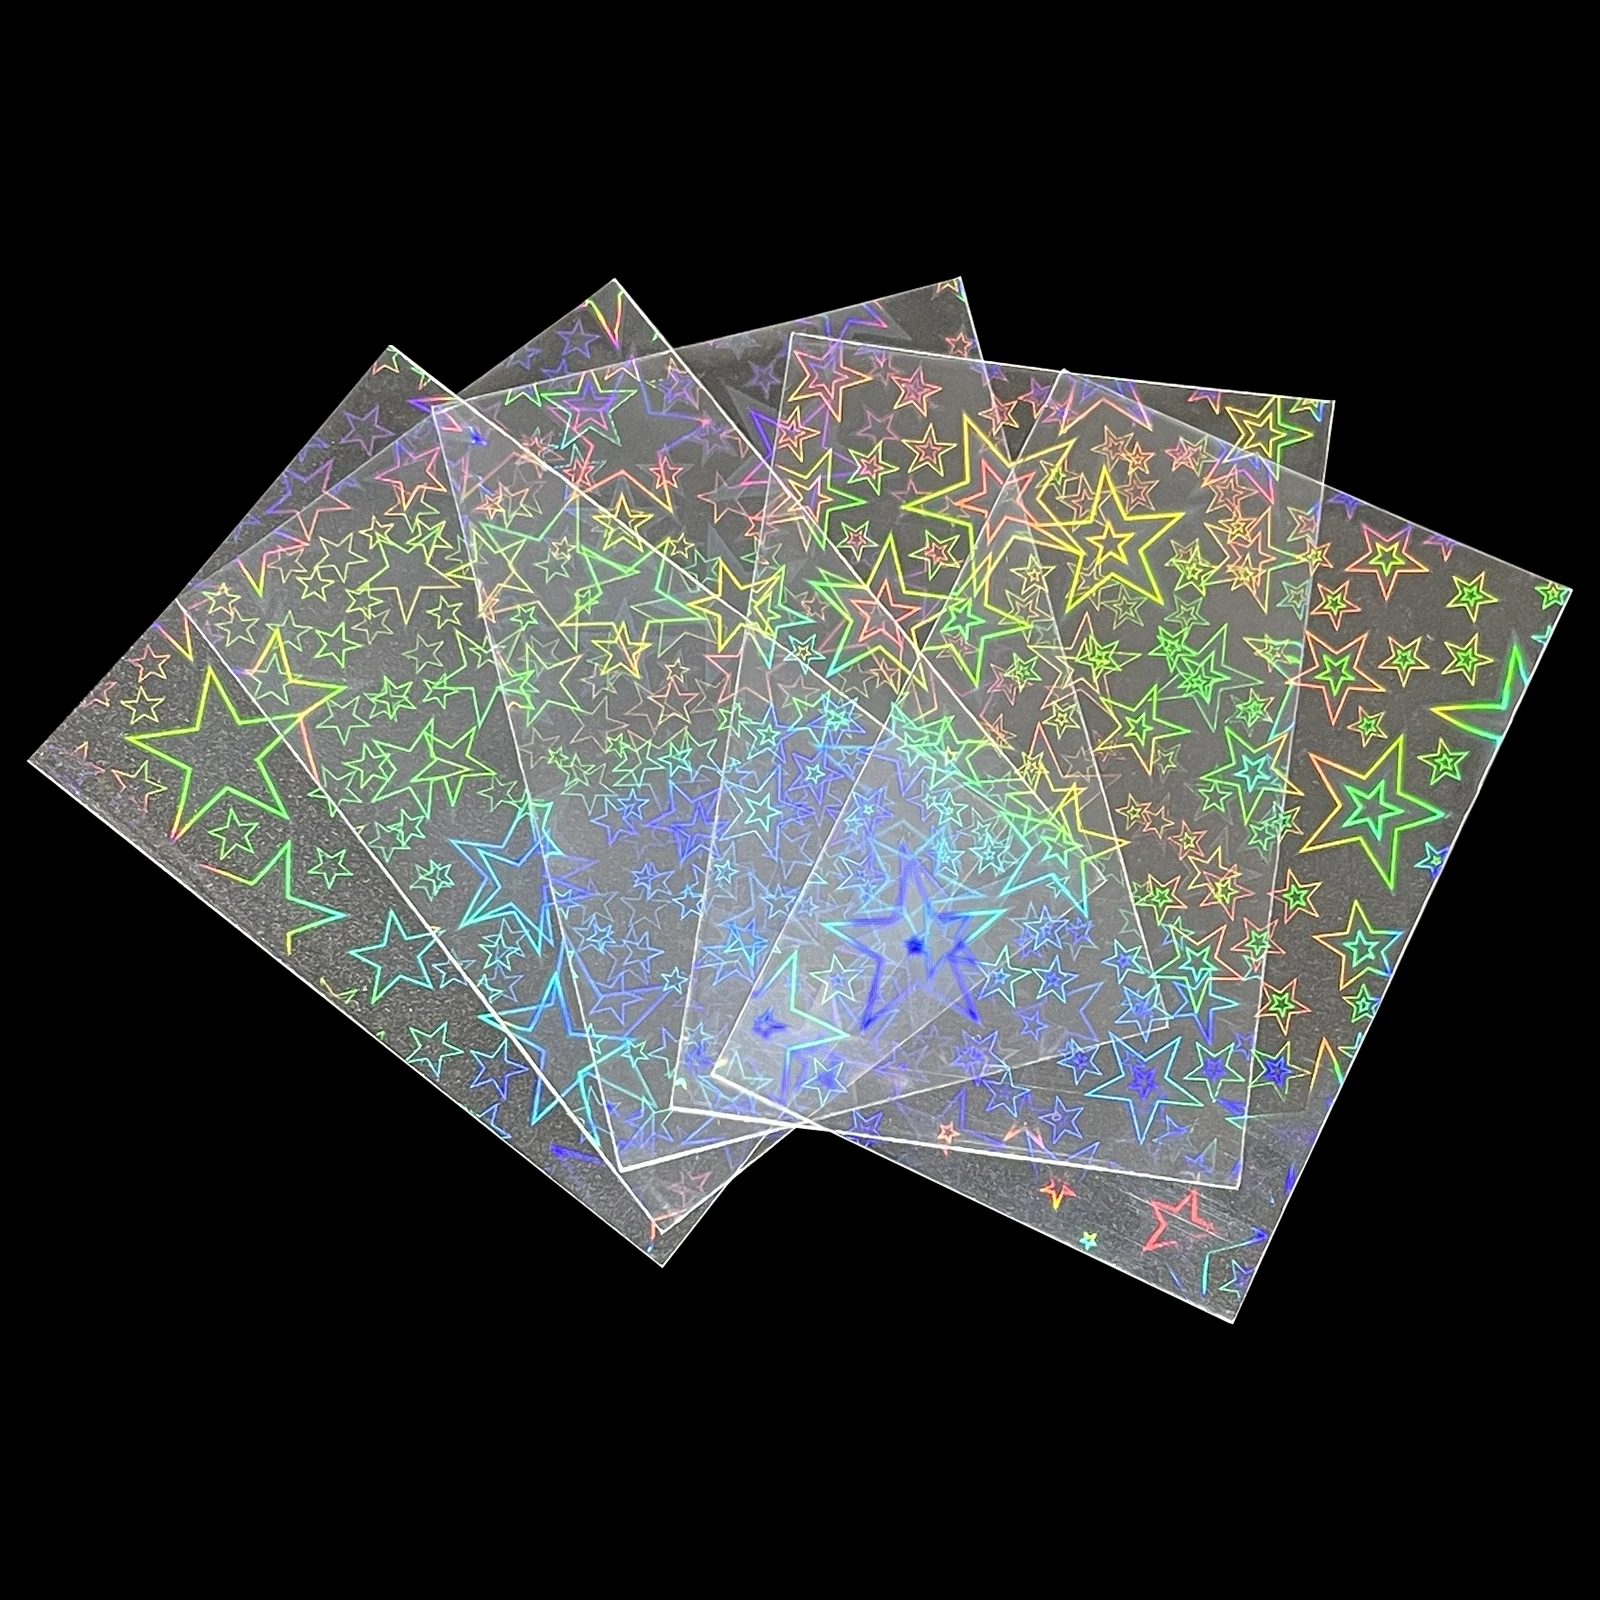 50PcsBig Star Laser Flashing Card Sleeves Holographic Film Idol Photo Card Games Magic Card Sleeve Trading Card Protective Cover 20pcs pack kpop toploader card bag photocard sleeves idol photo cards protective storage bag